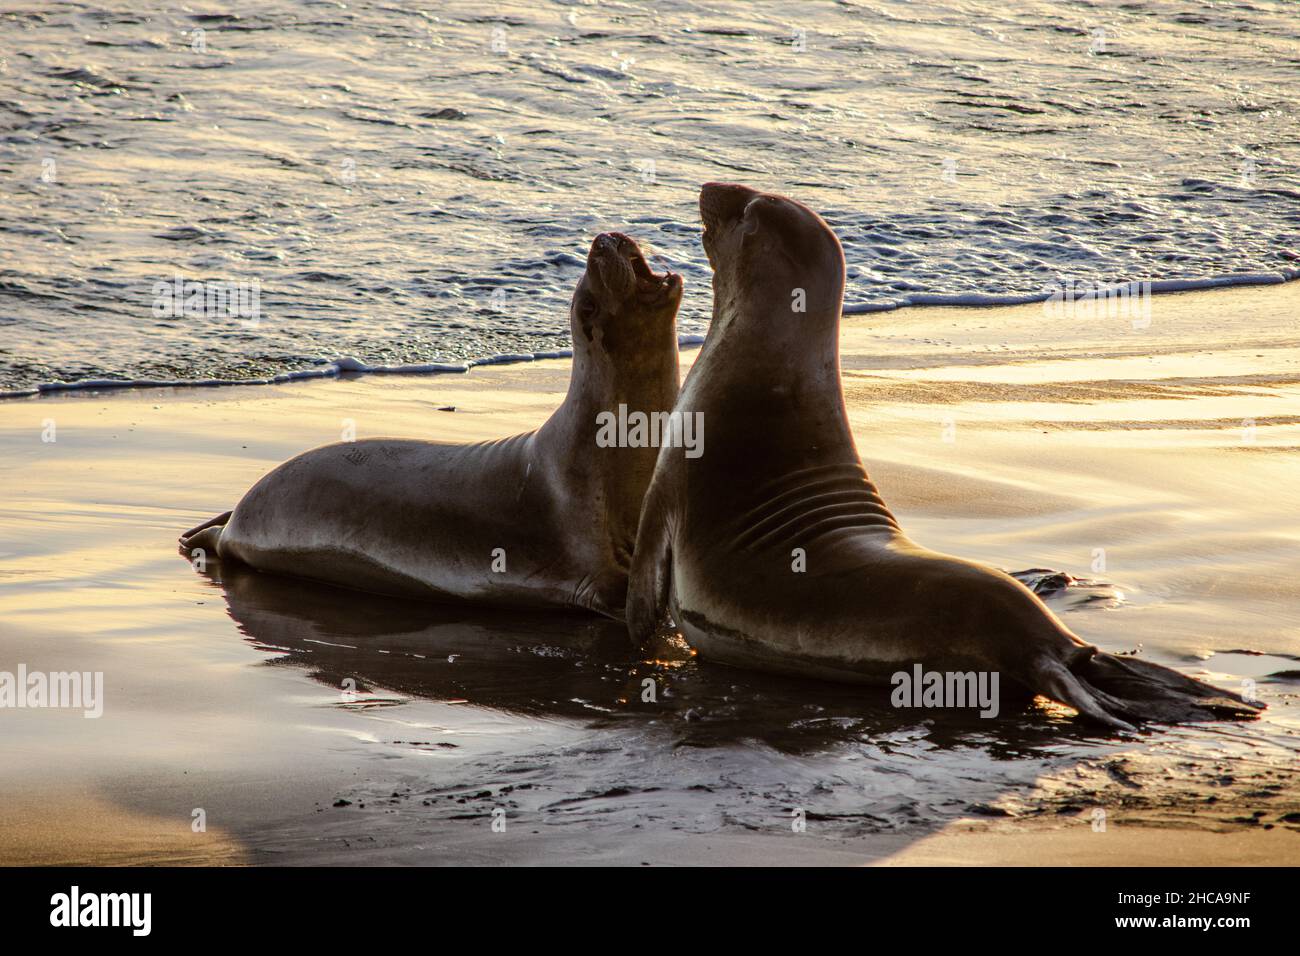 Closeup of Elephant seals on the beach during the sunset in California, the US Stock Photo